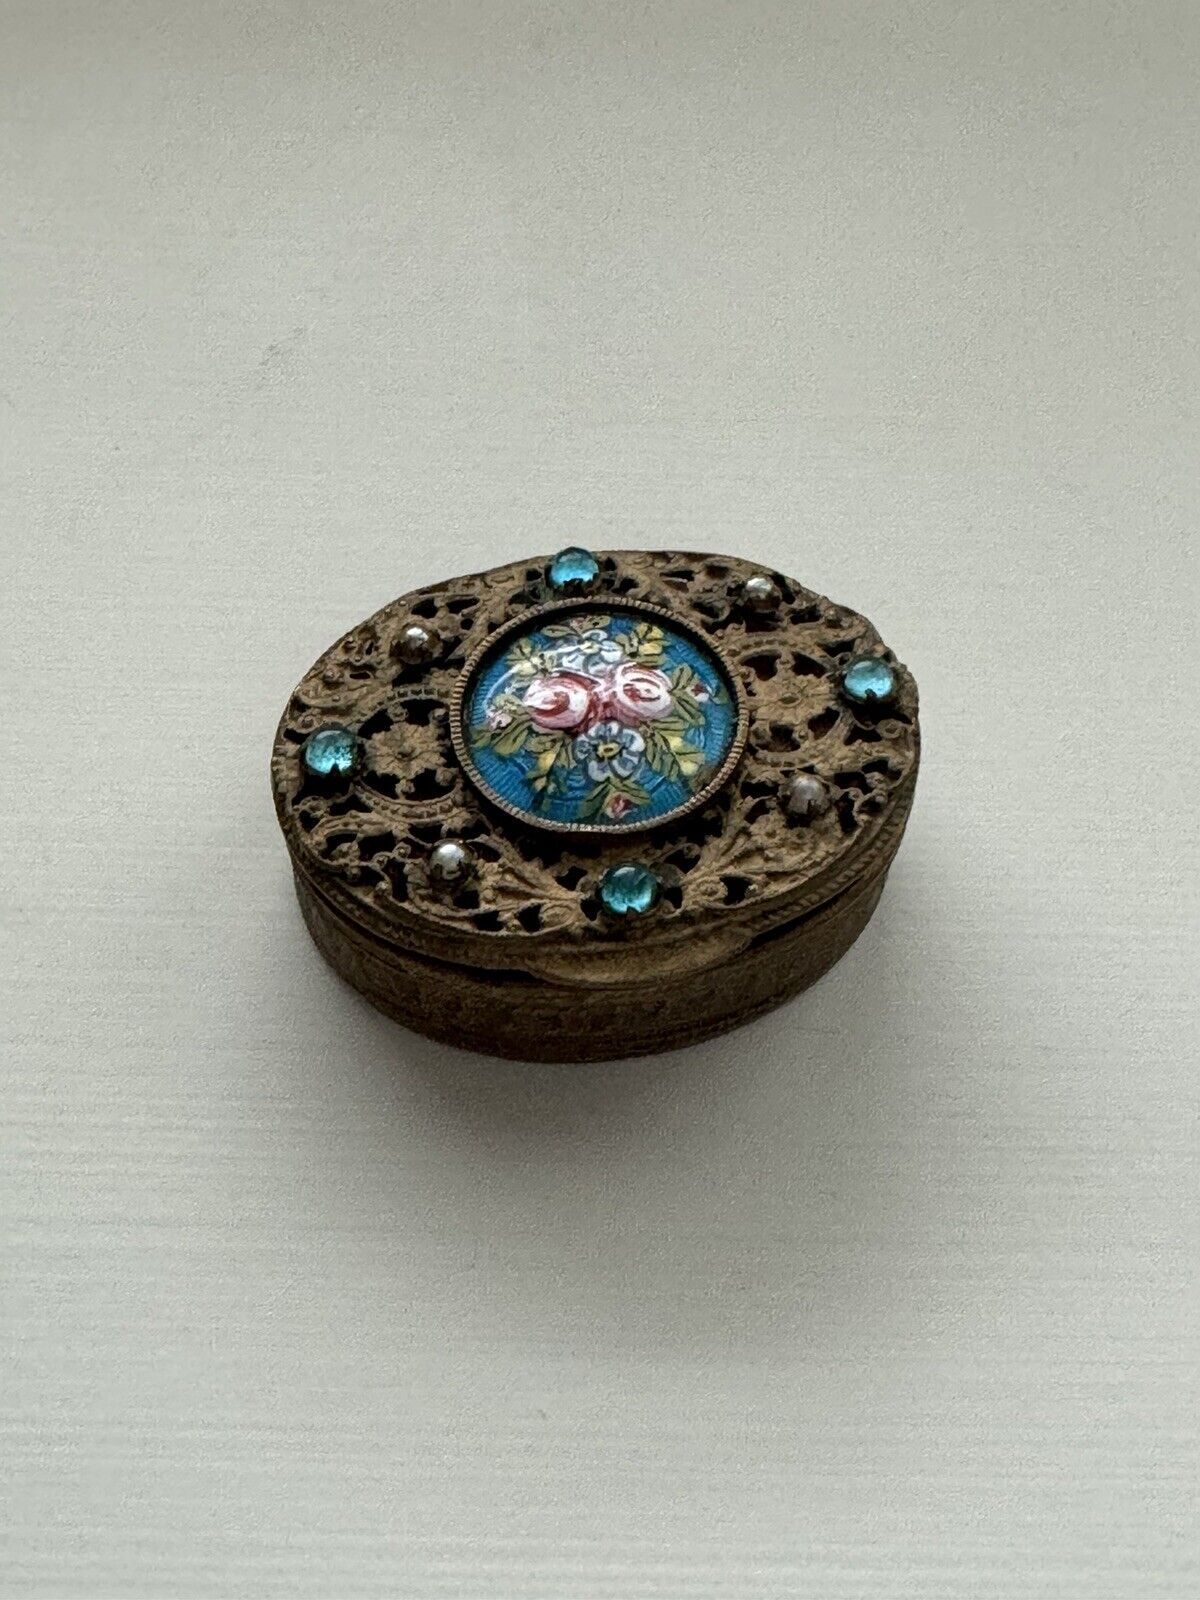 Antique Compact - Jeweled & Filigree - French - 1900